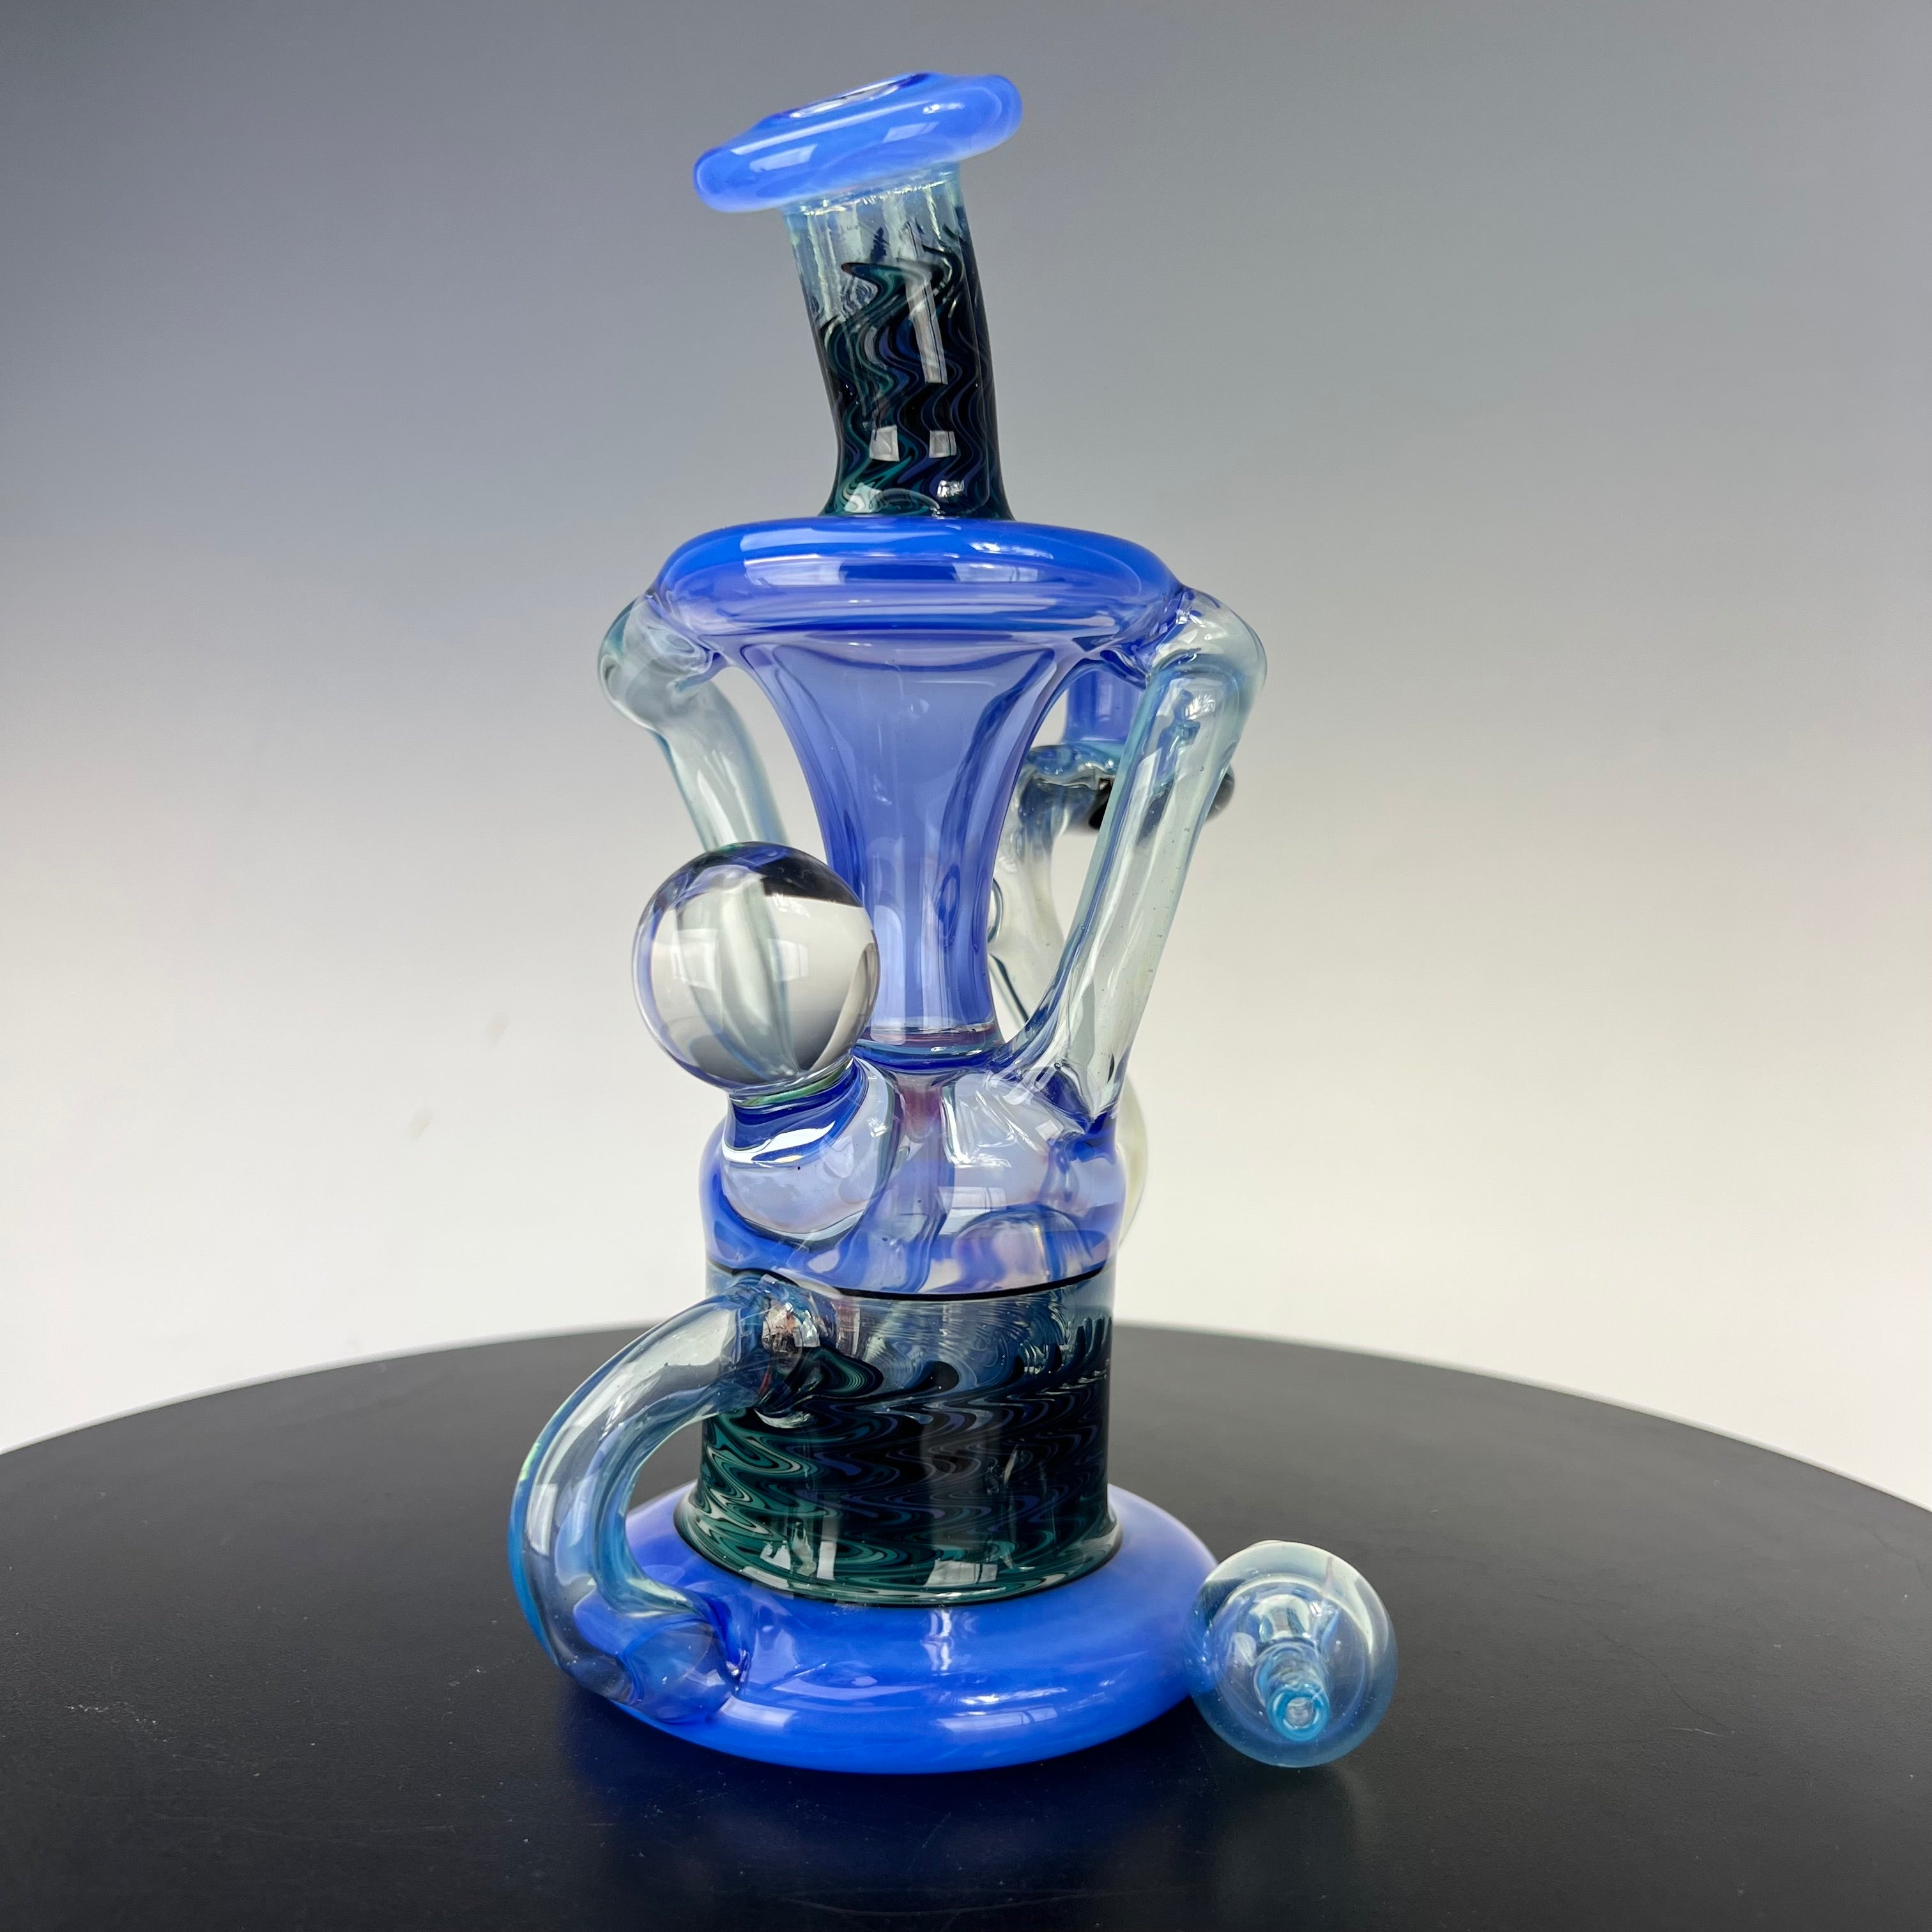 Andy G Recyclers